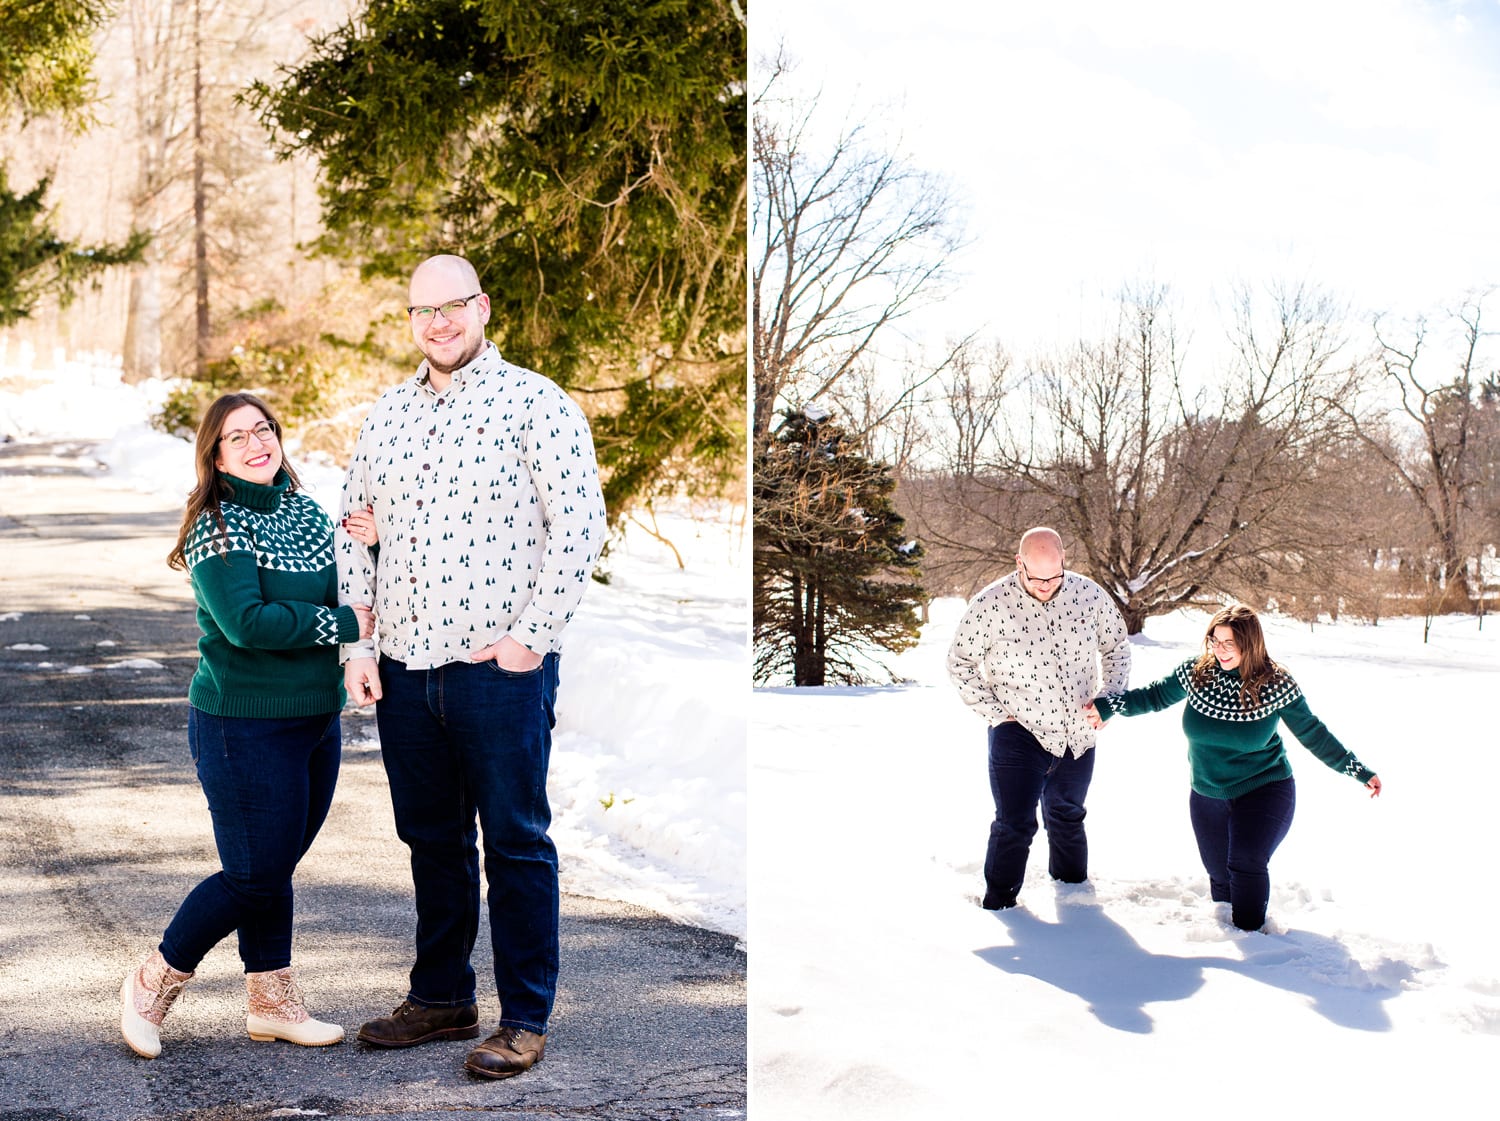 Engagement photos in the snow at Skylands Manor in Ringwood, NJ